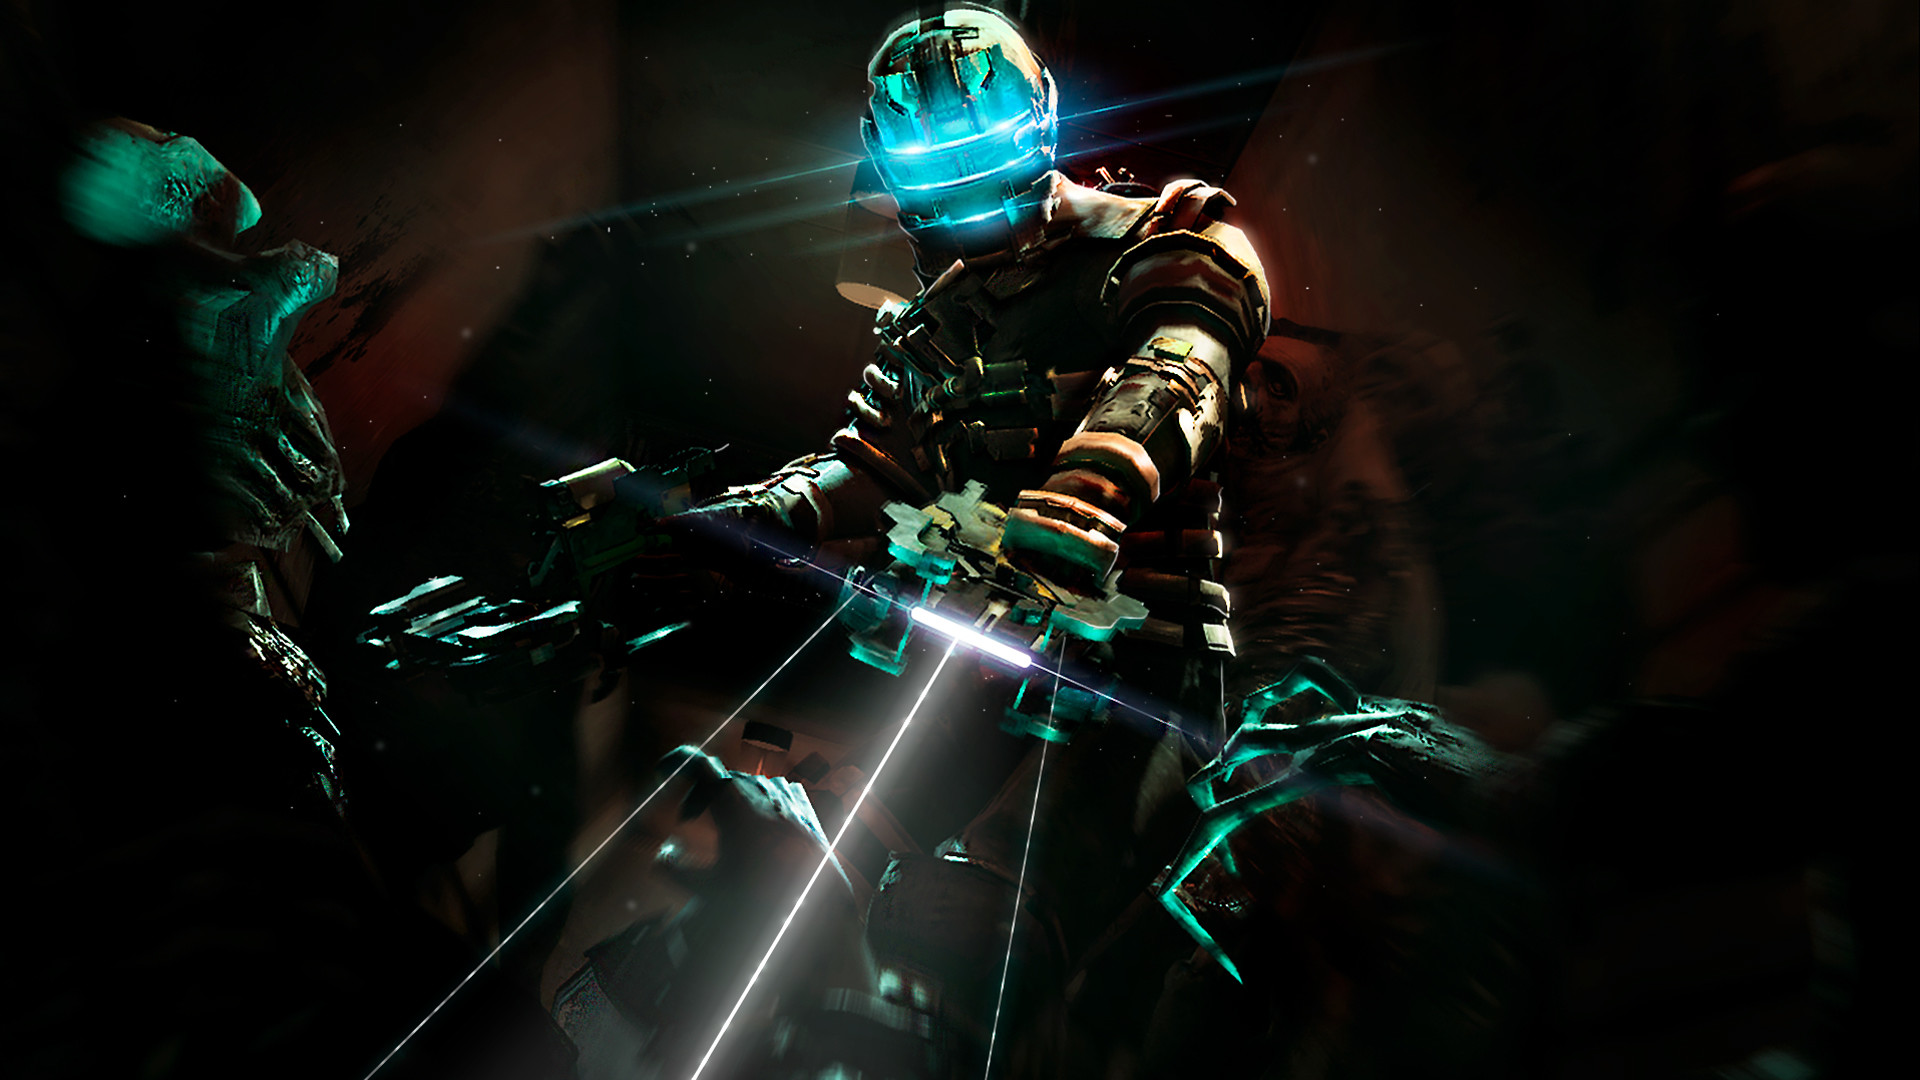 dead space HD wallpapers backgrounds